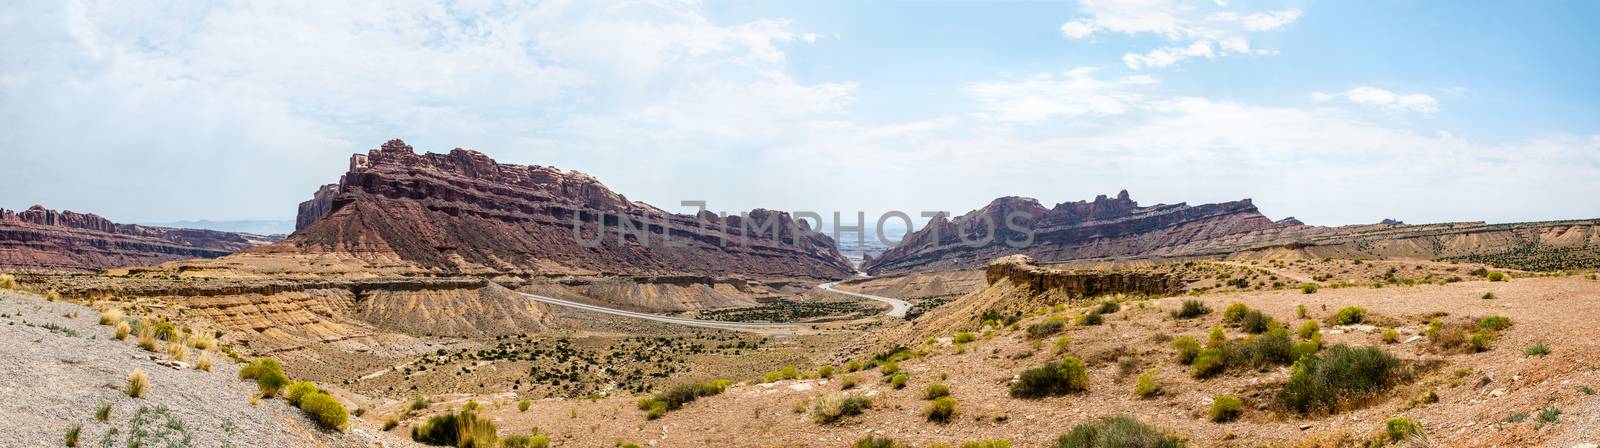 Panorama looking out onto Spotted Wolf Canyon in the San Rafael Swell, Utah by Njean